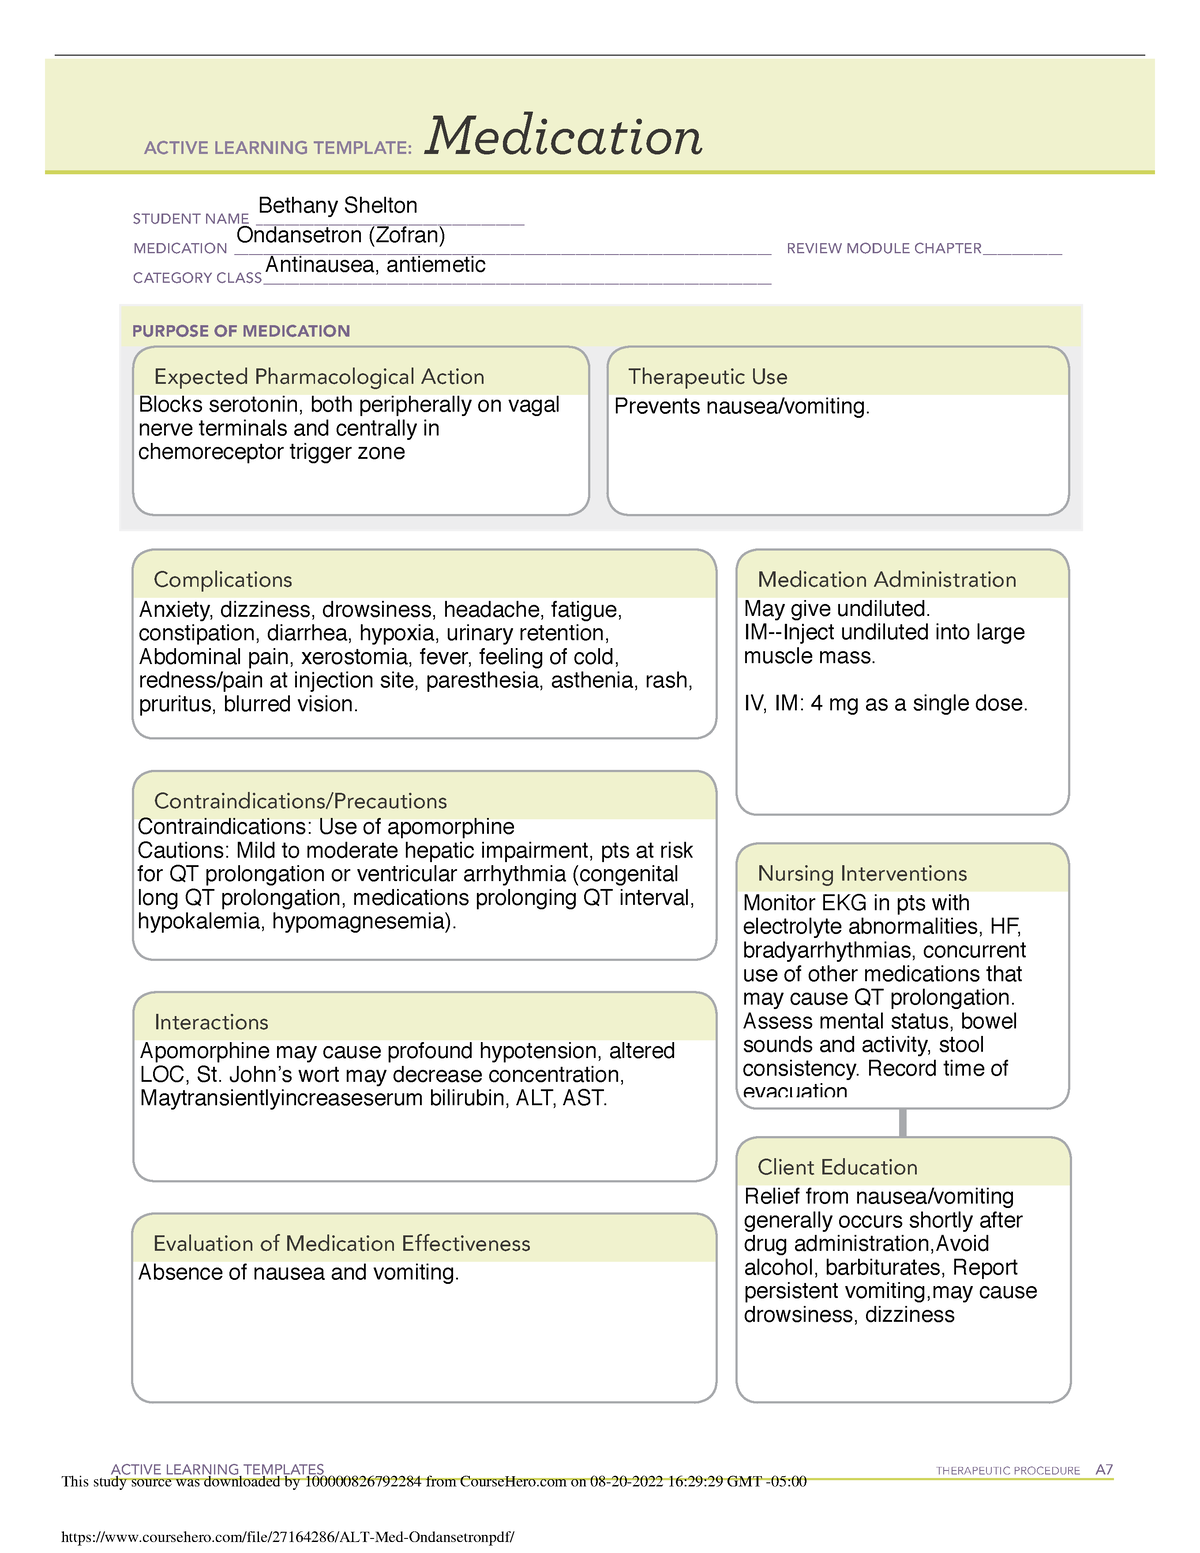 Ondansetron ati template ACTIVE LEARNING TEMPLATES THERAPEUTIC